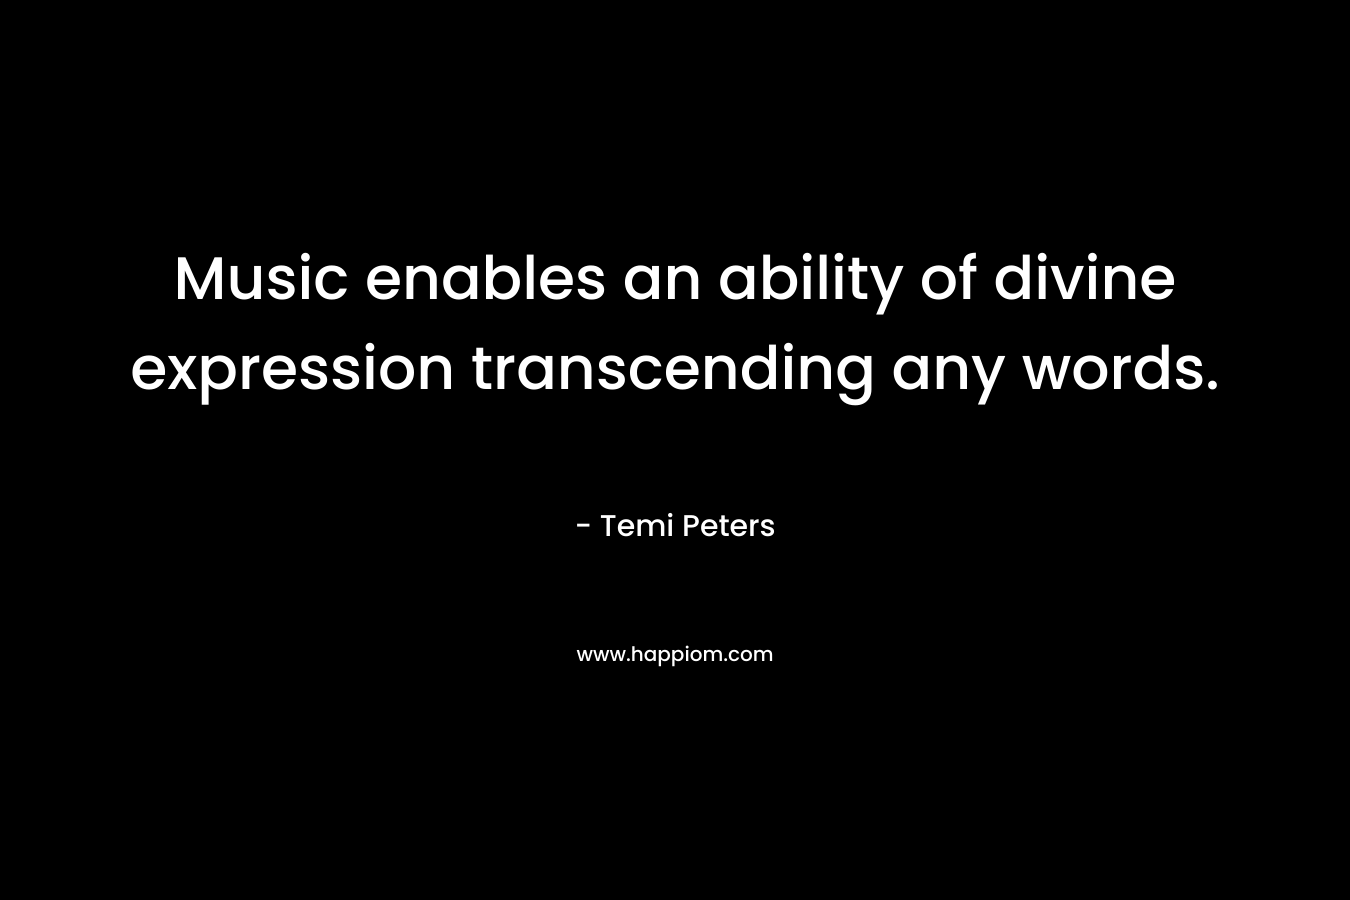 Music enables an ability of divine expression transcending any words.